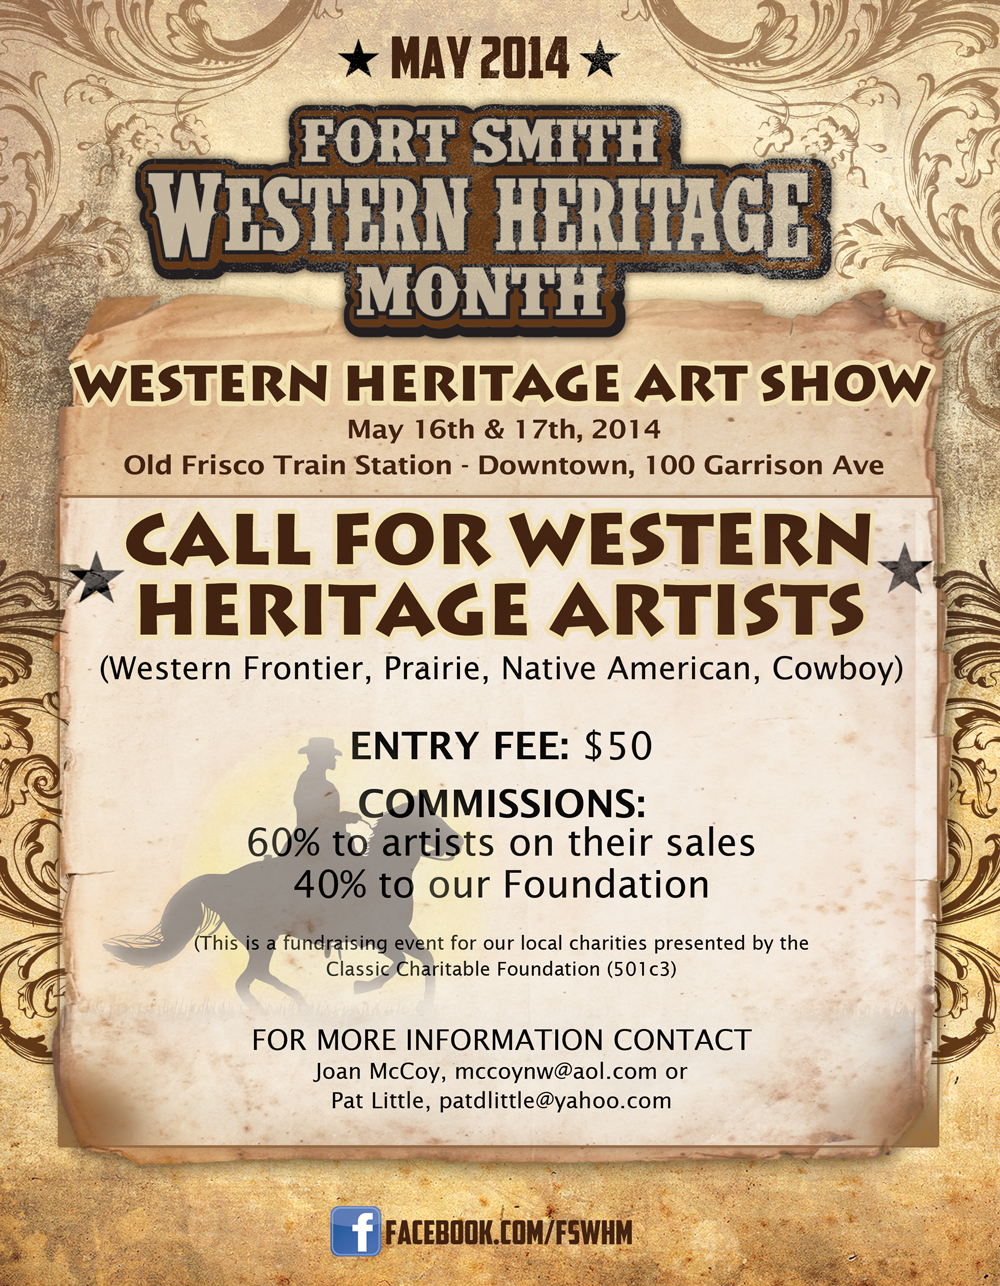 Fort Smith Western Heritage Art Show